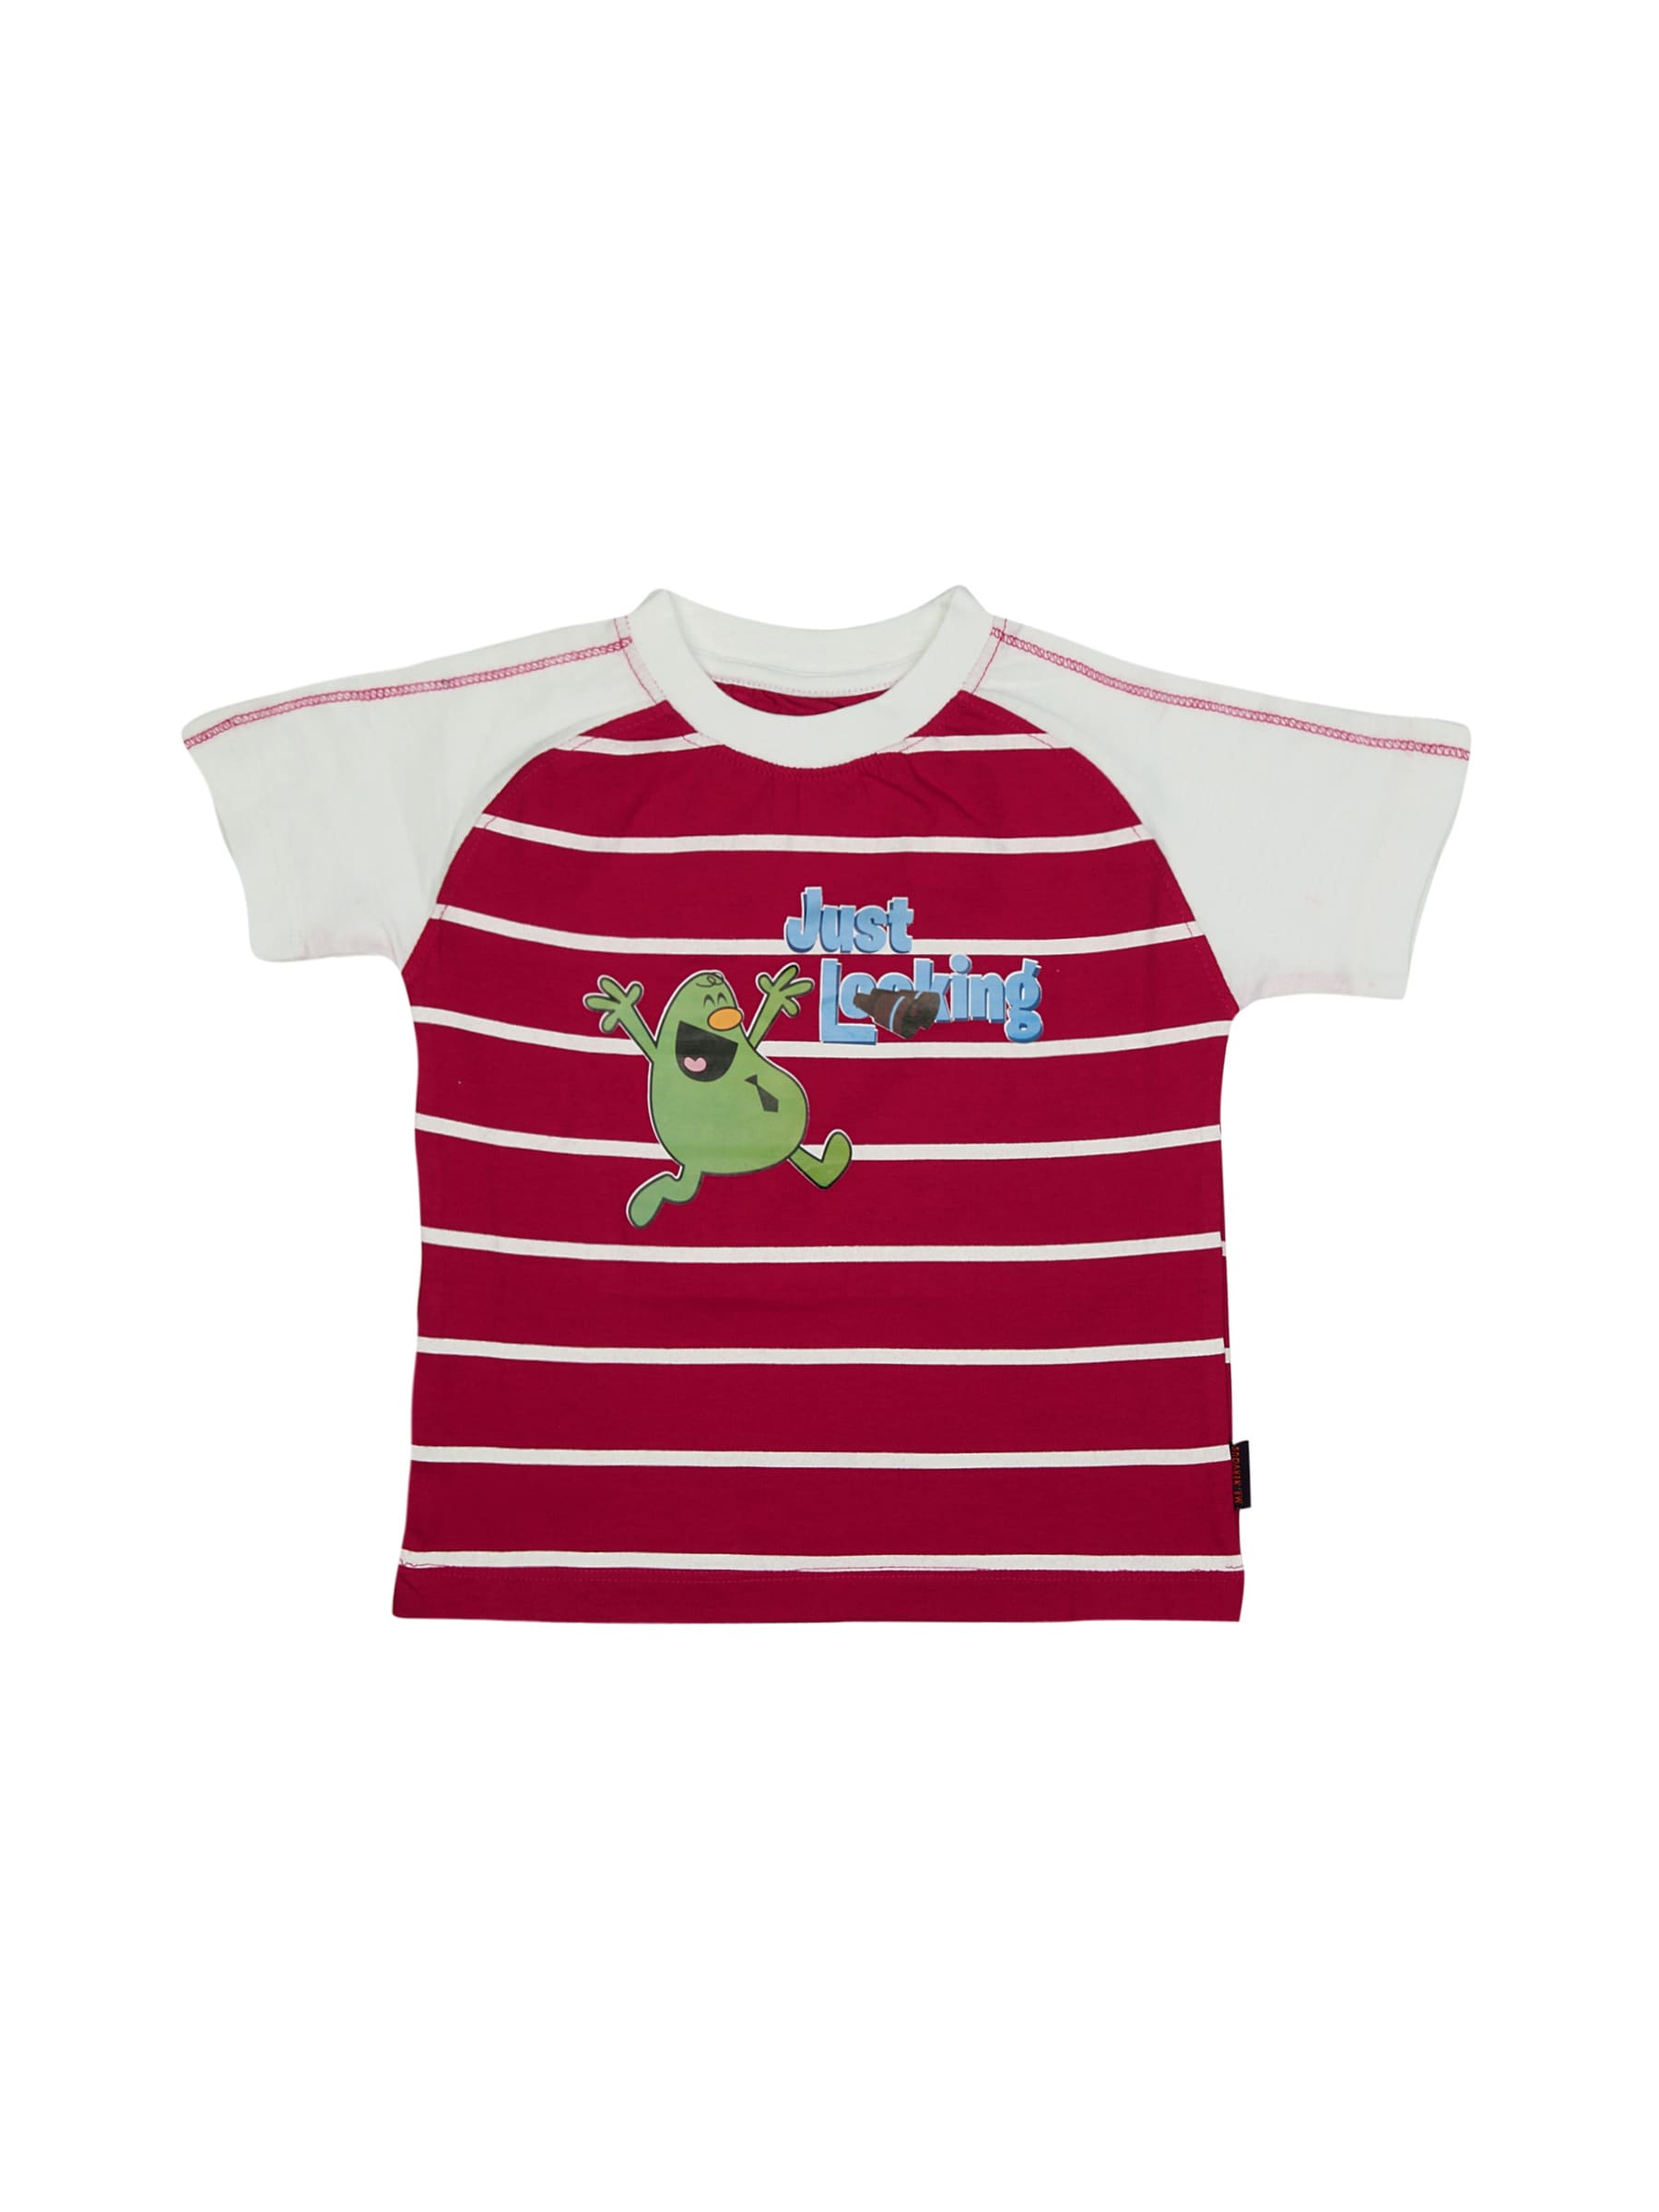 Mr.Men Boys Just Looking Red T-shirt